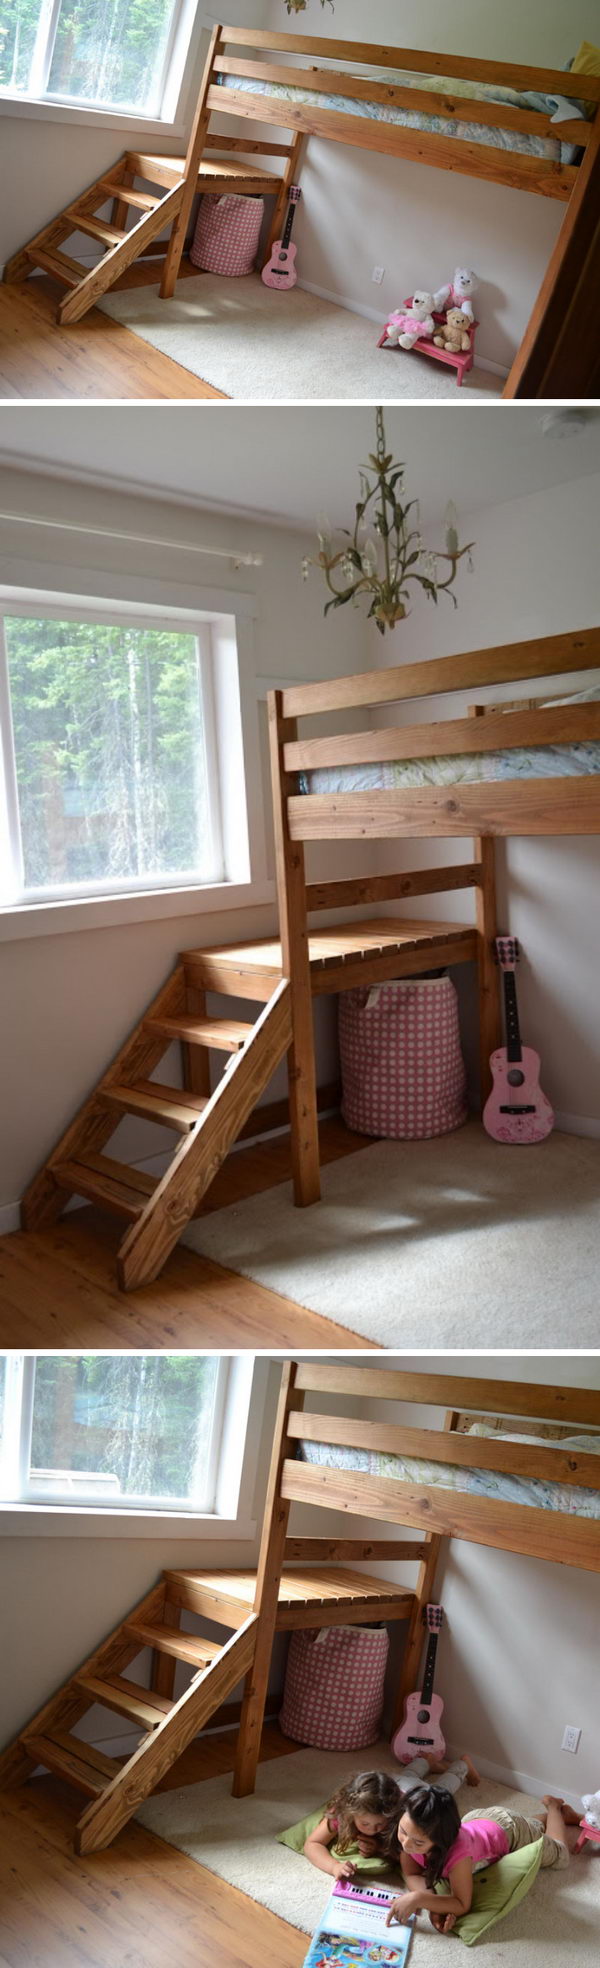 bunk bed in front of window